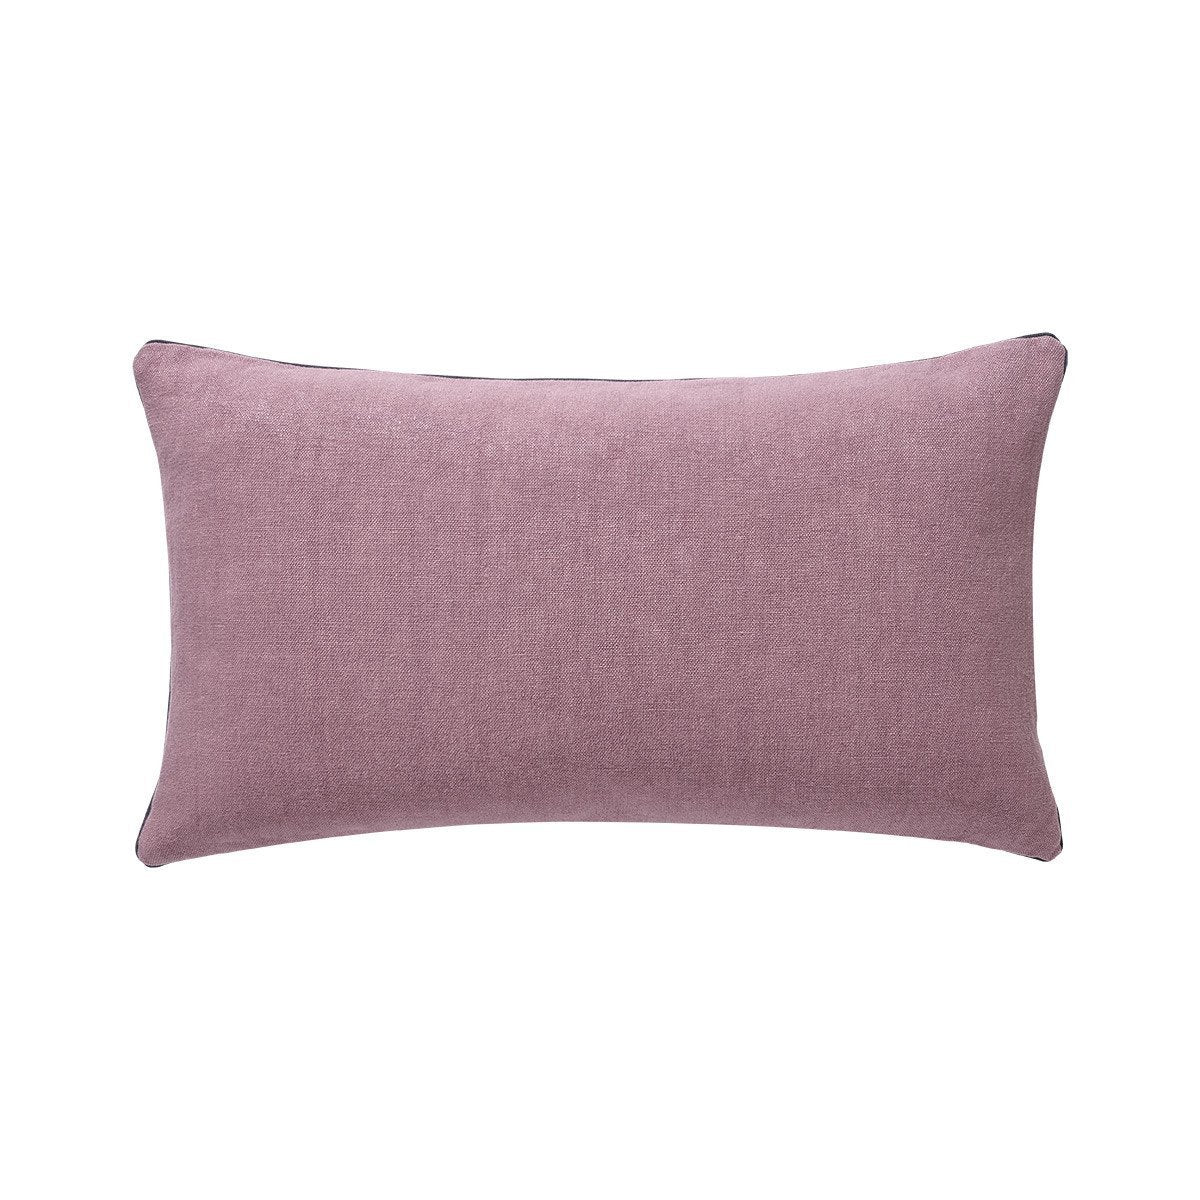 Pigment Blush Decorative Pillow by Iosis | Fig Linens and Home